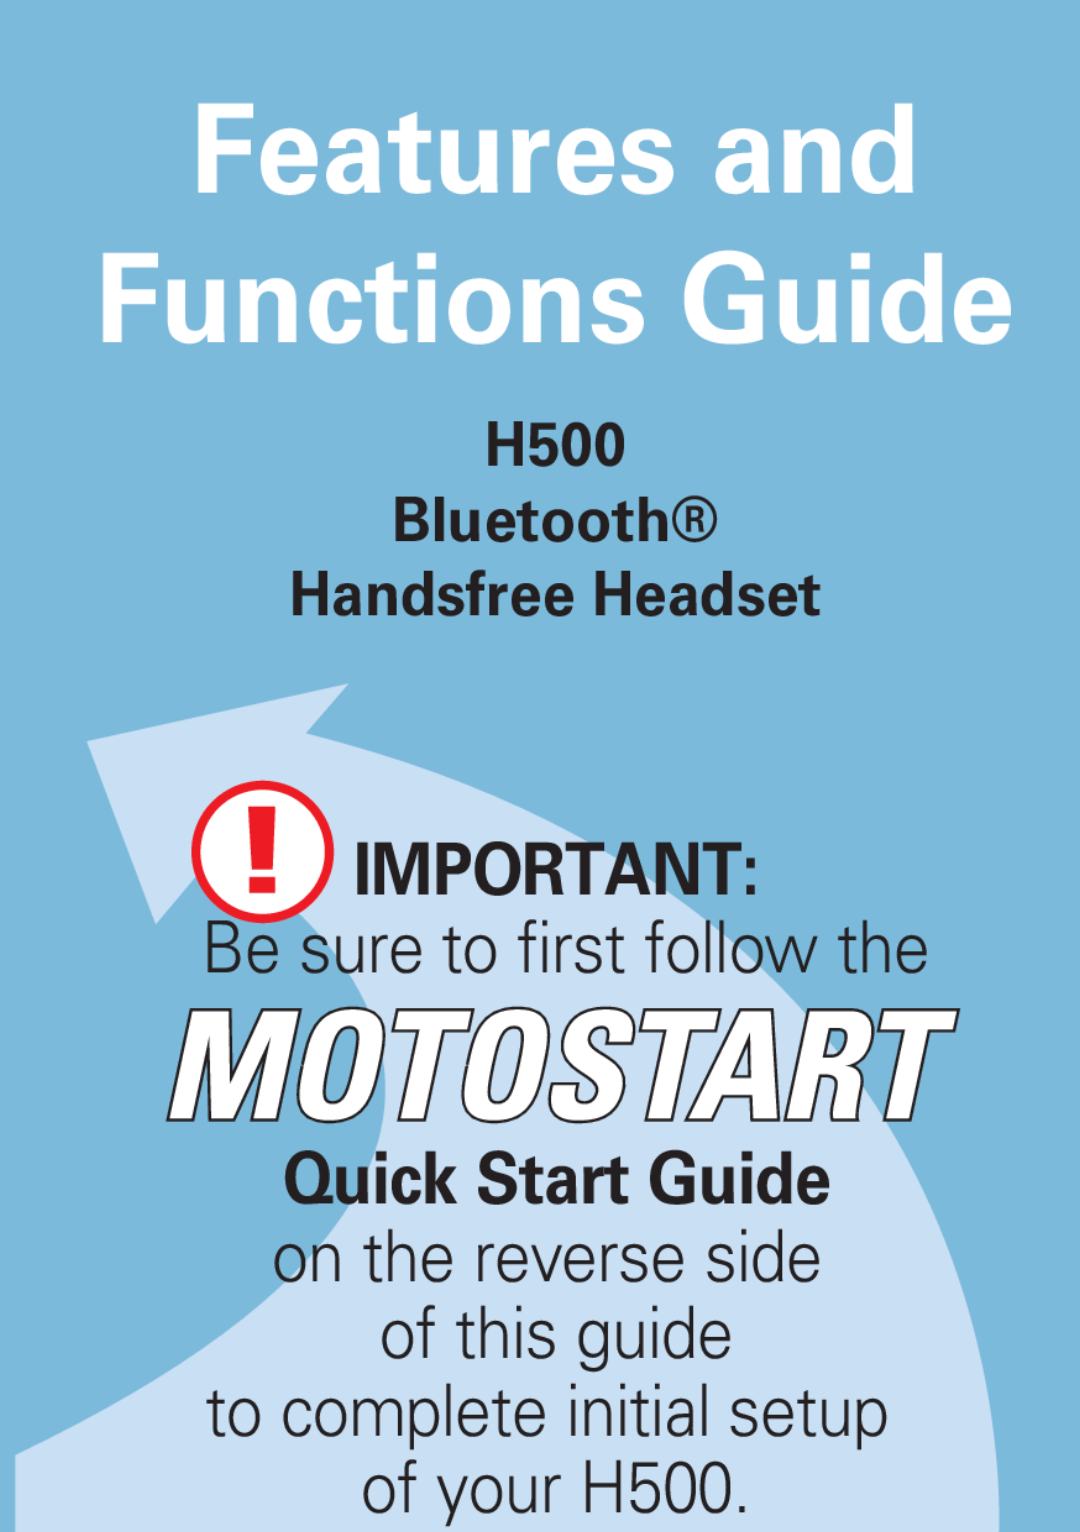 Motorola manual Features and Functions Guide, Be sure to first follow the, to complete initial setup of your H500 